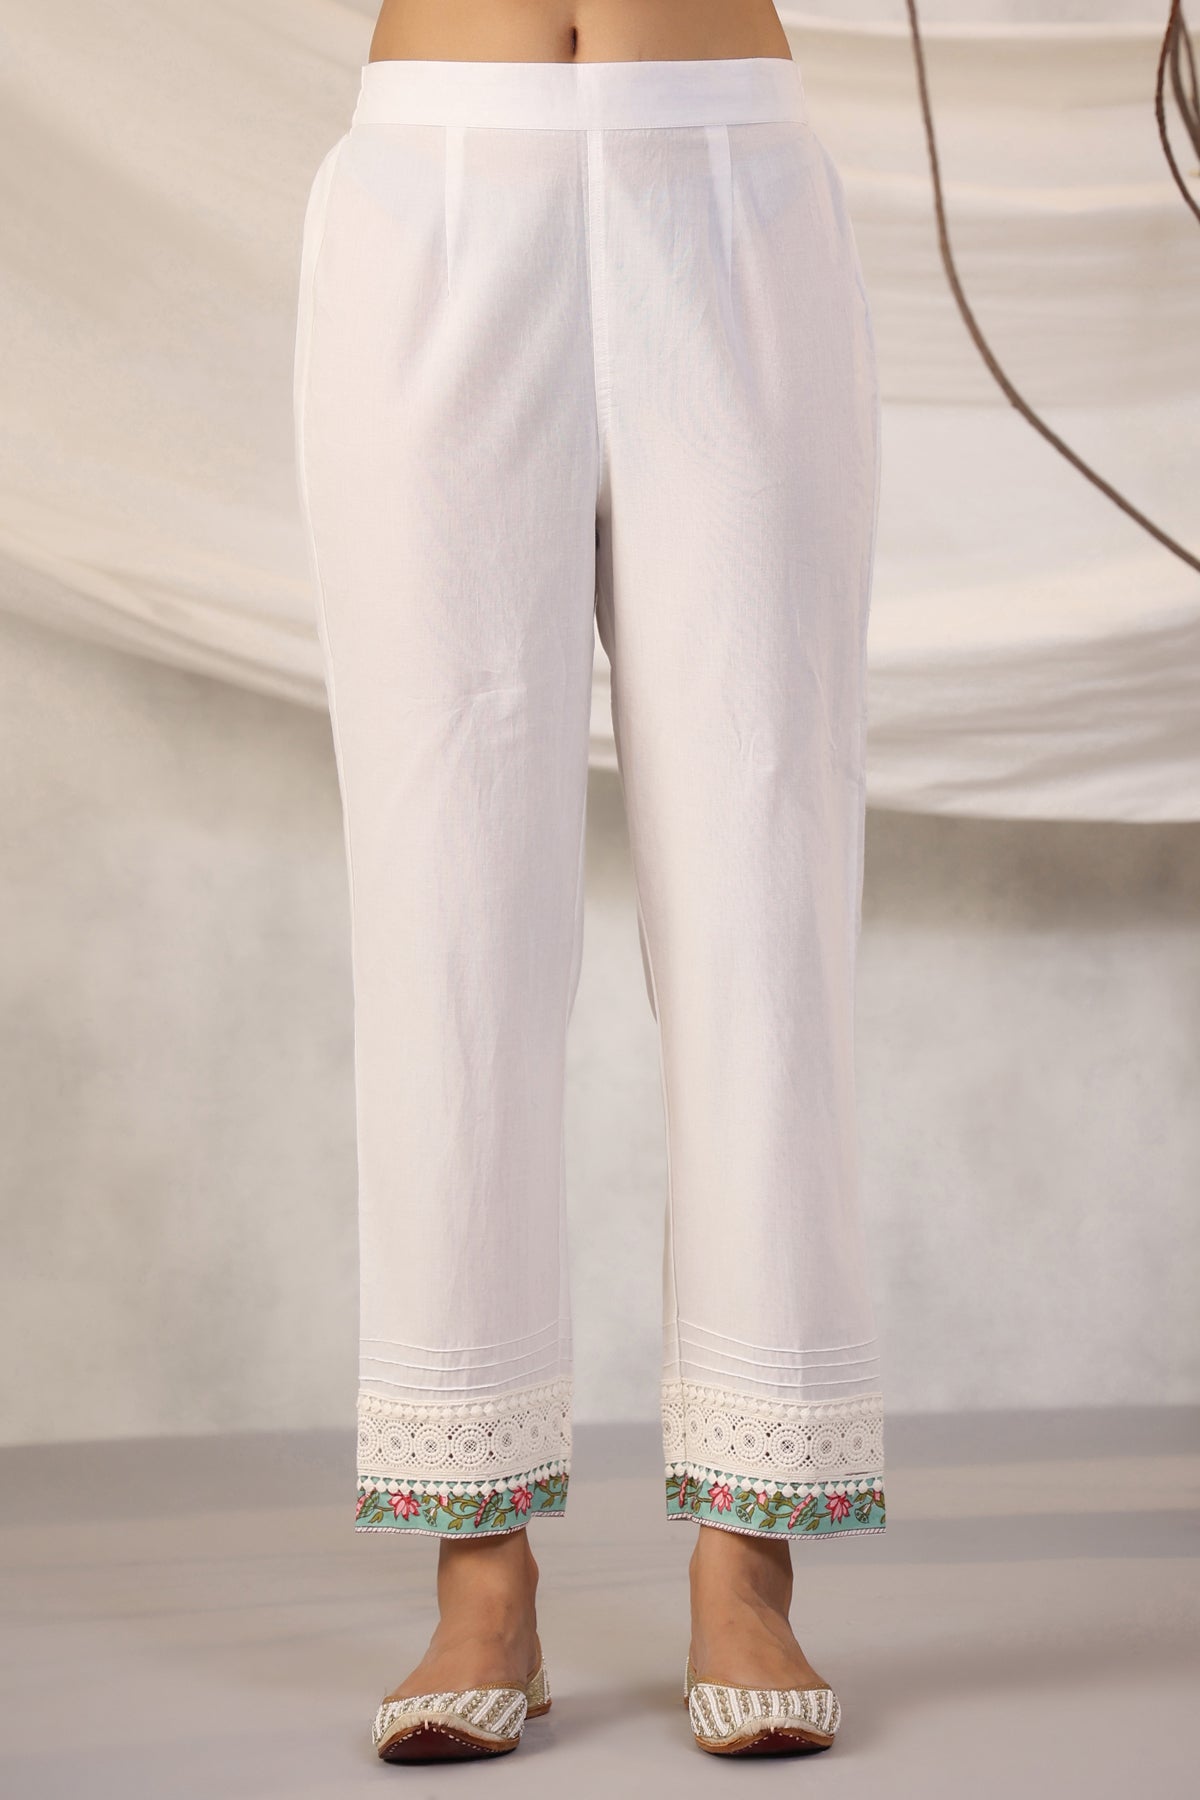 Firdous Nasrine Relaxed Fit Cotton Pants - shahenazindia